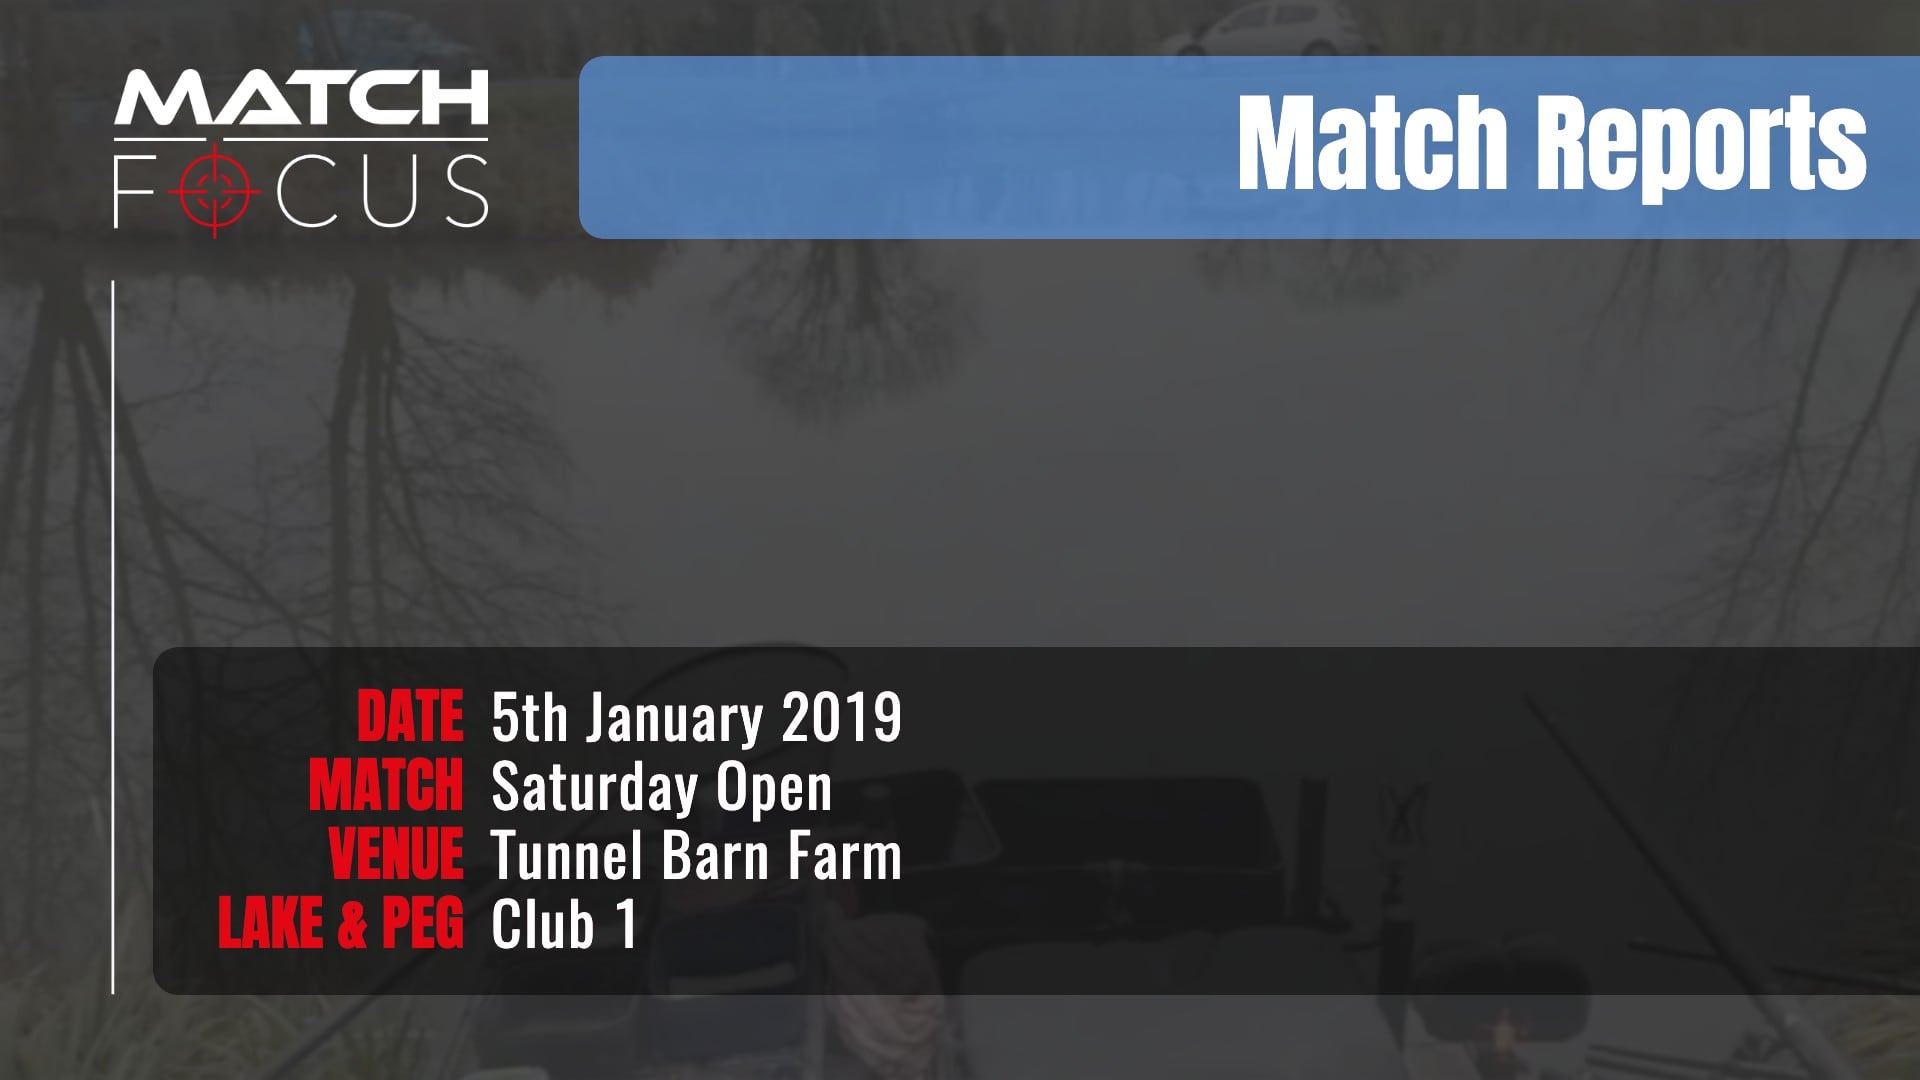 Saturday Open – 5th January 2019 Match Report